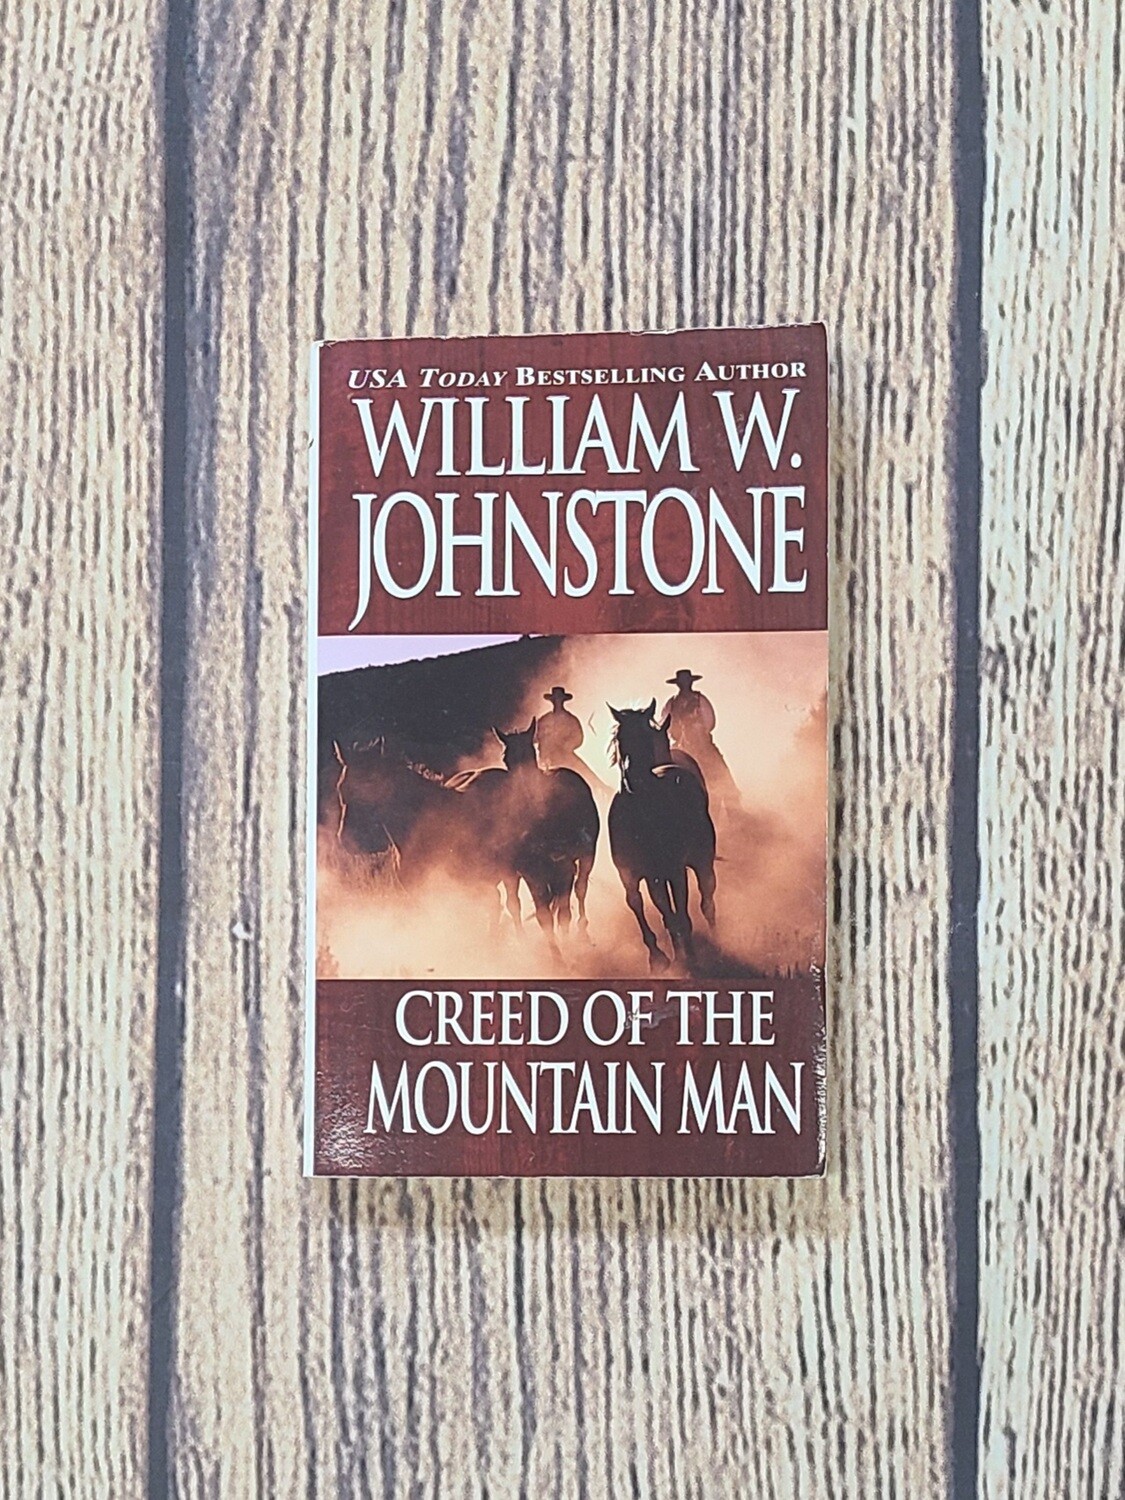 Creed of the Mountain Man by William W. Johnstone